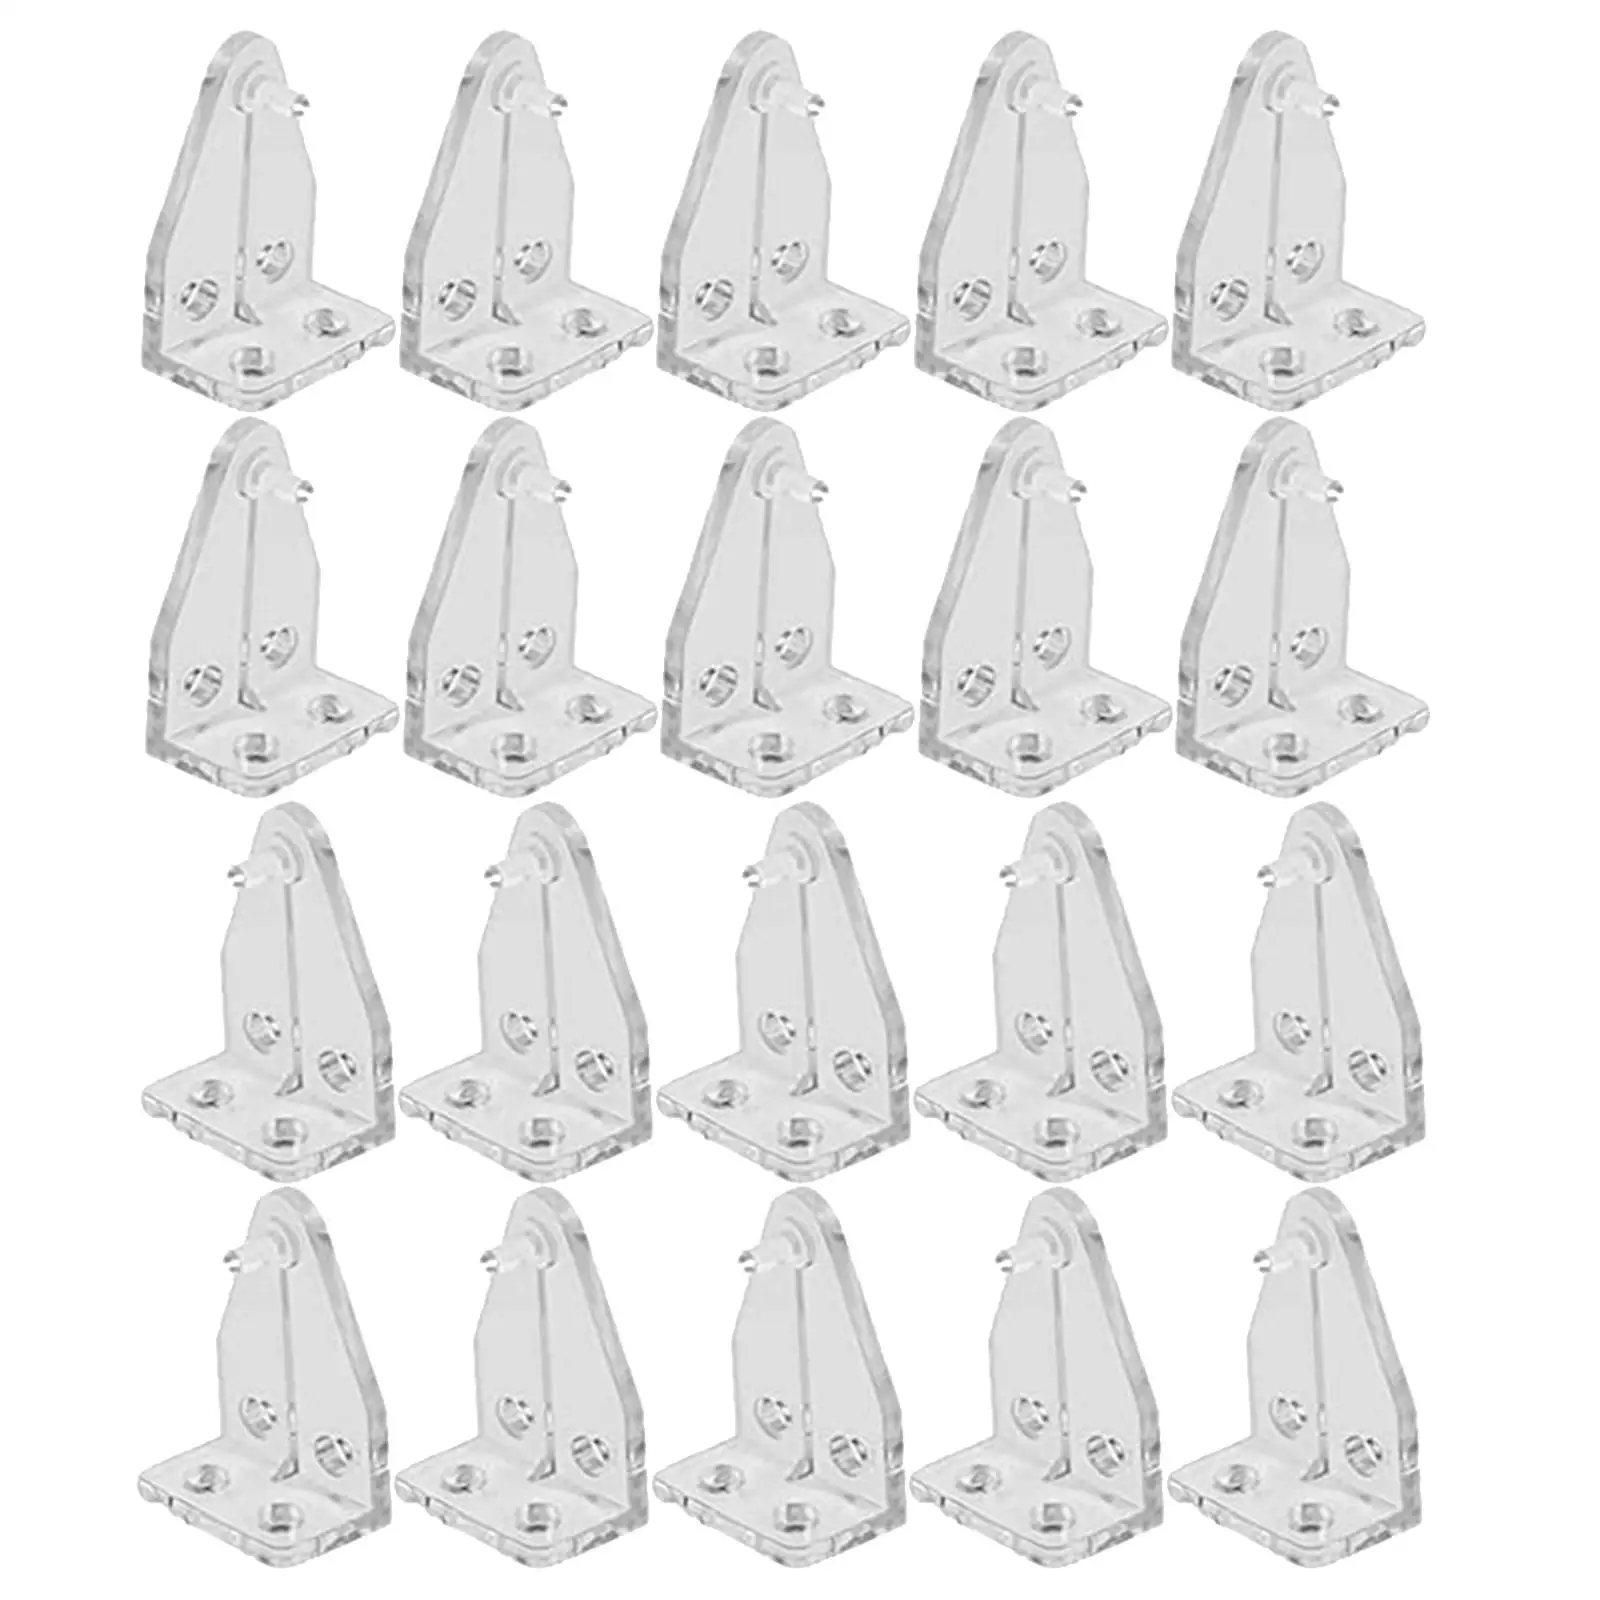 20Pcs  Positioning Hooks Clear Bracket Connector for Roller Shutters